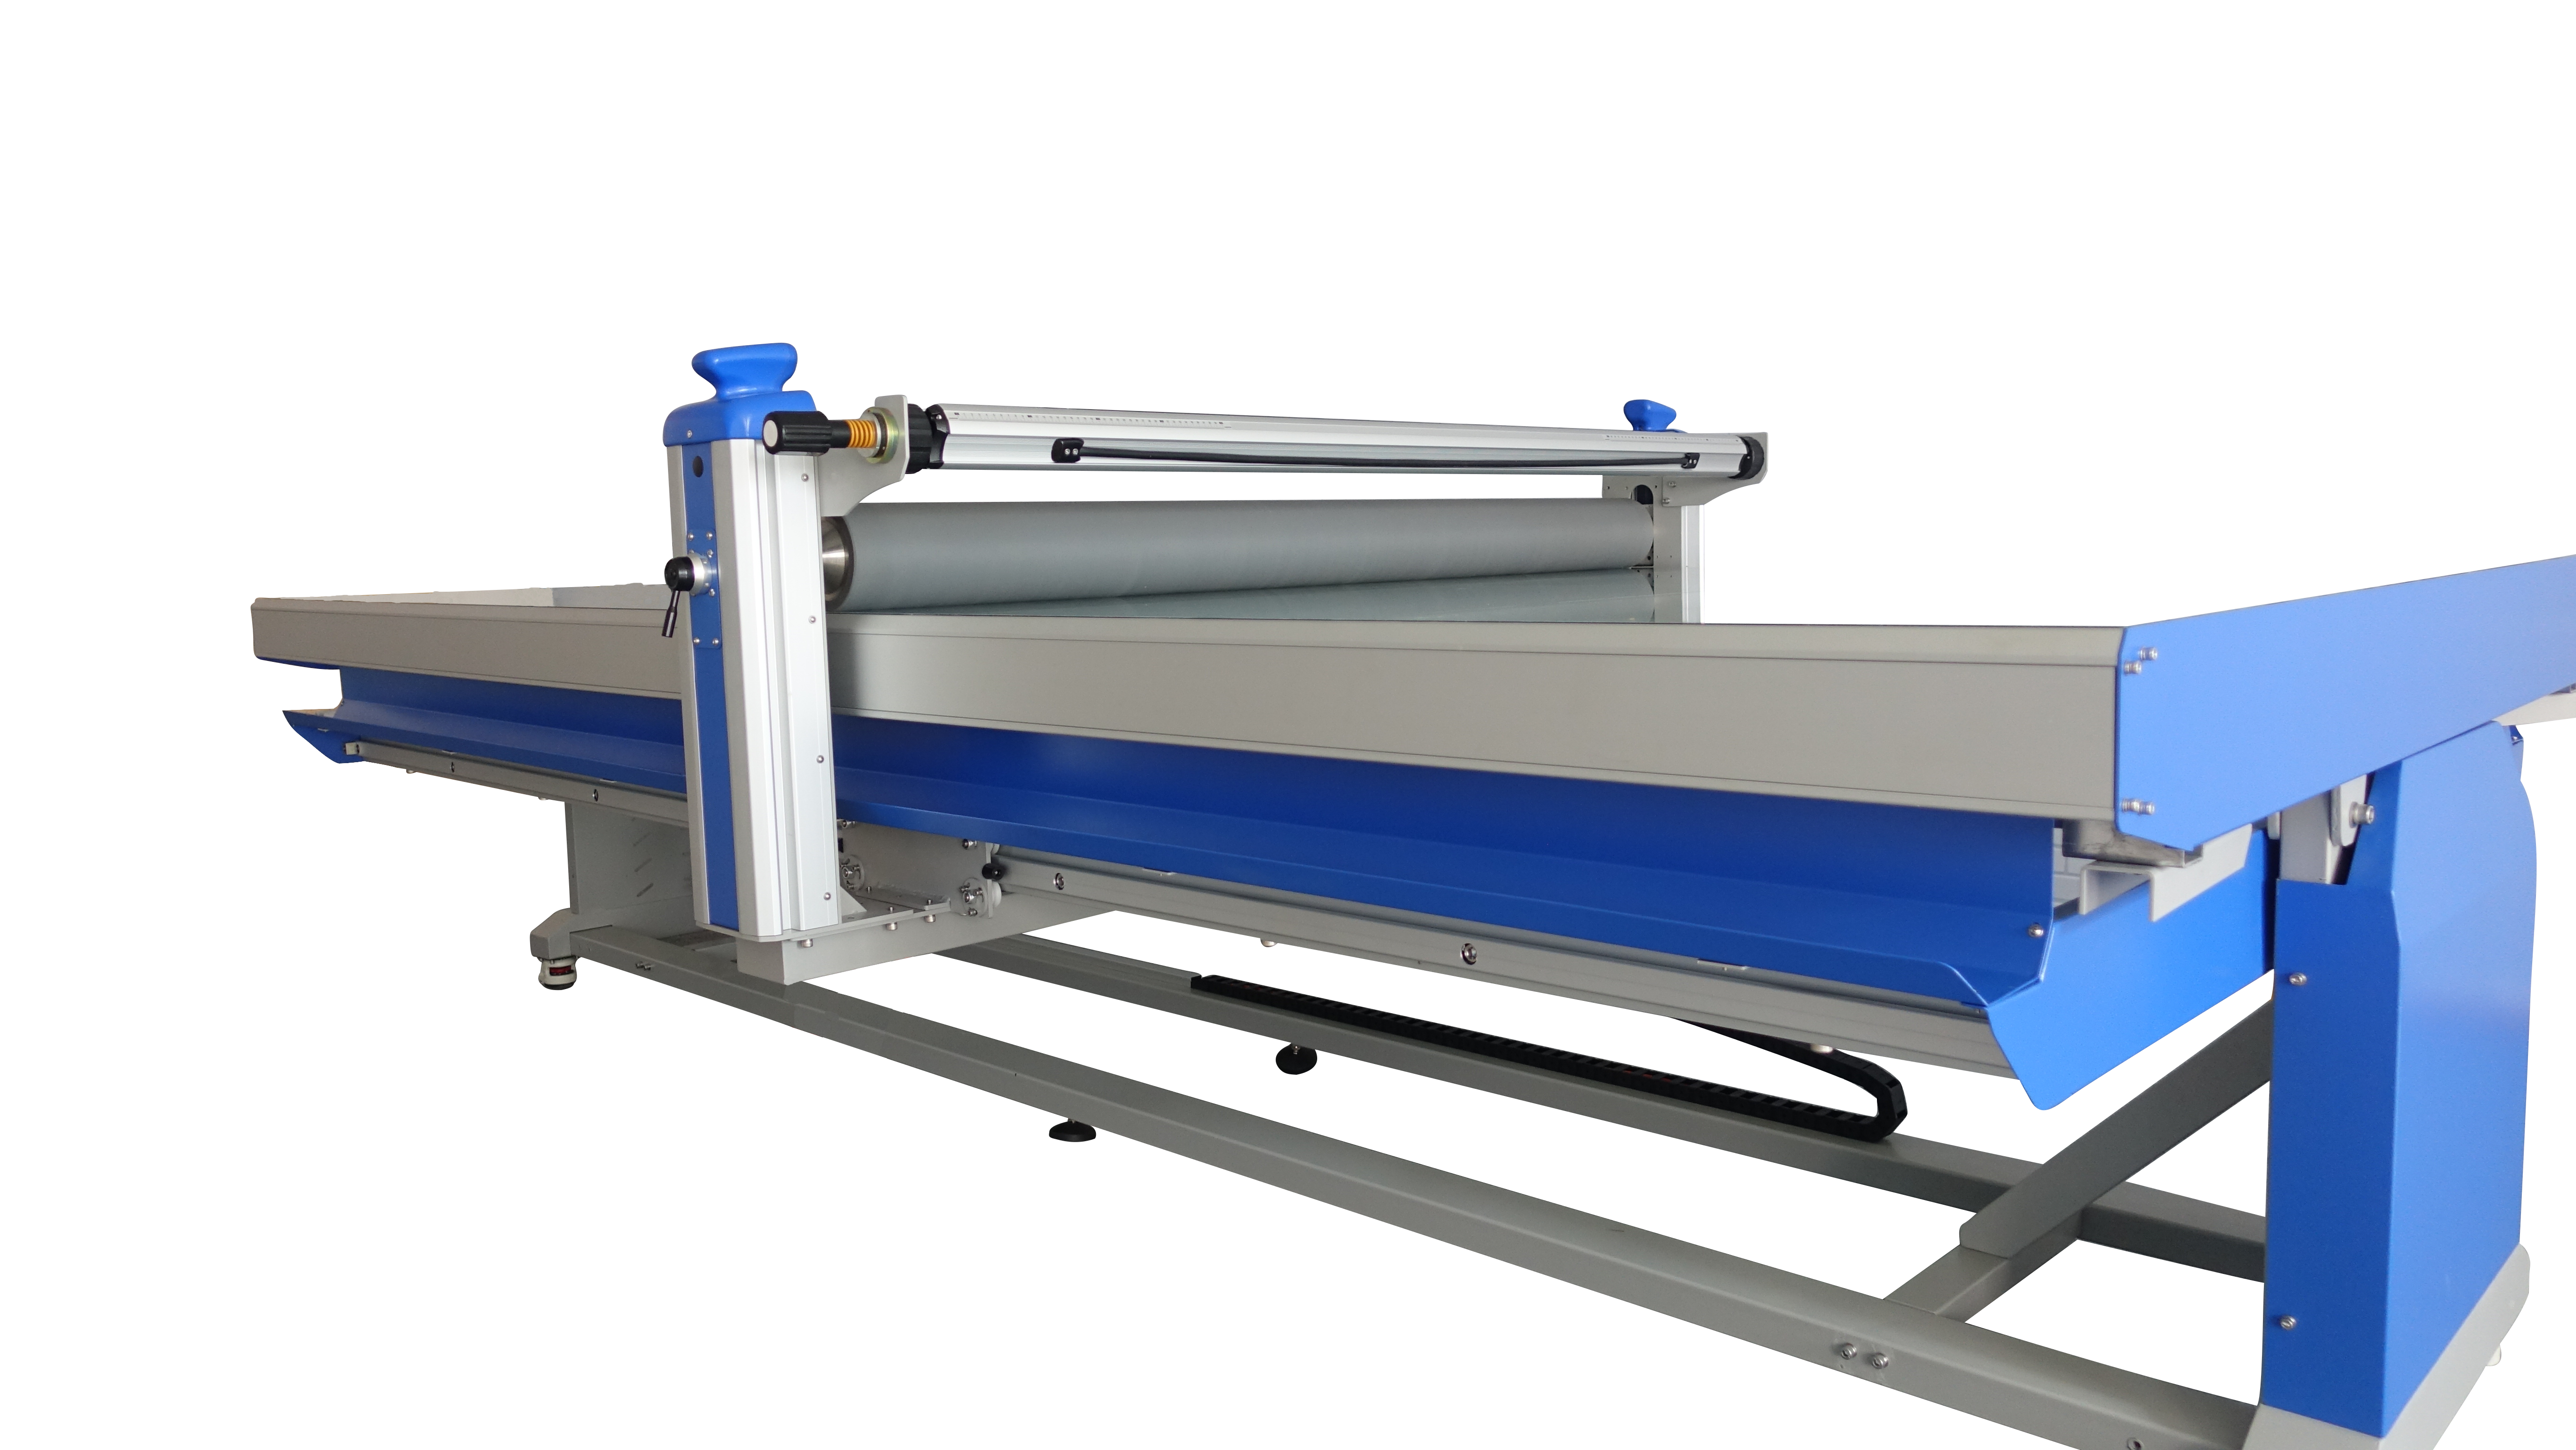 Flatbed applicator for laminating